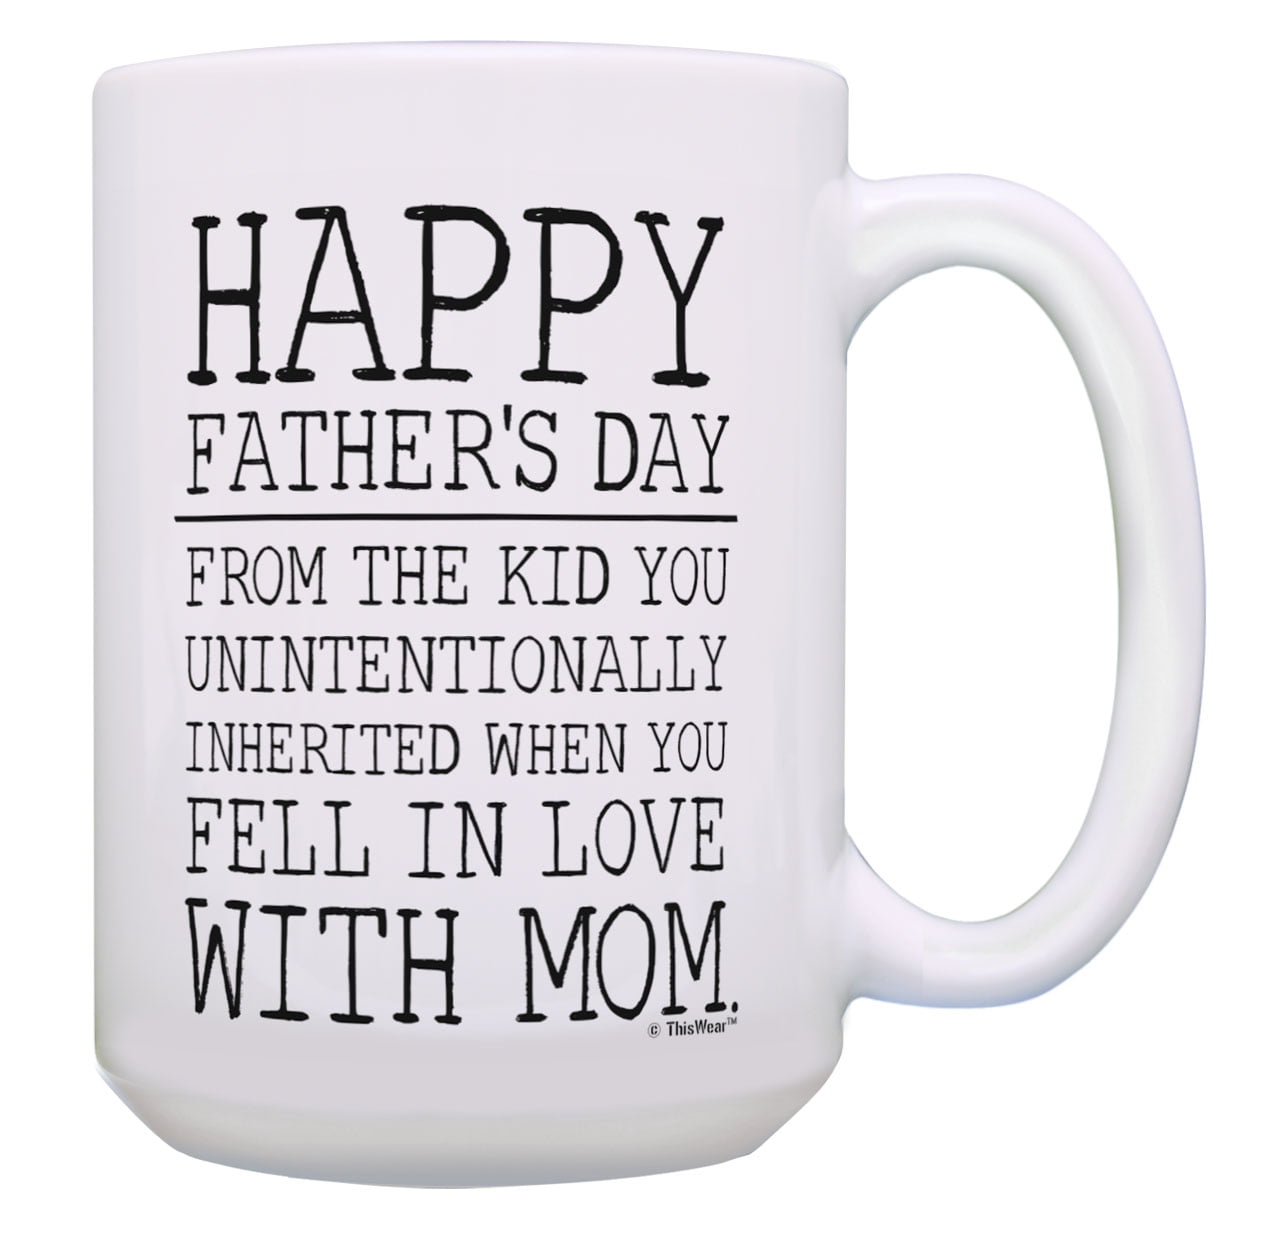 Comcl coffeemug Coffee Gift/Stepdad Shacking Up with My Mom Best Dad Ever 1st Day/Funny Father Mug 11OZ